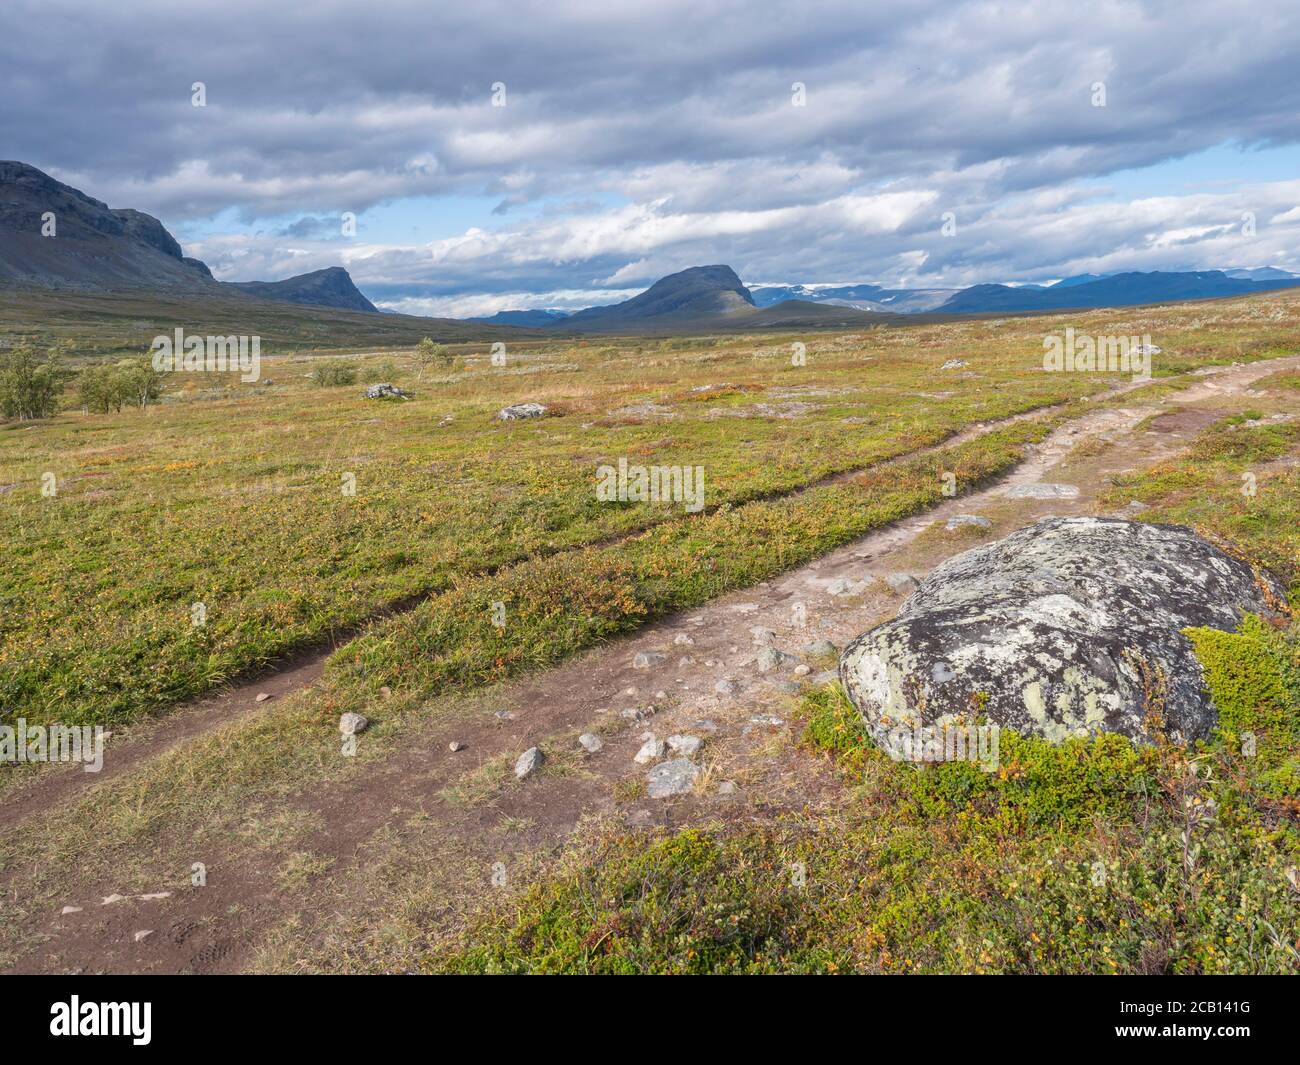 Lapland landscape with Kungsleden hiking trail near Saltoluokta, Sweden. Wild nature with snow capped mountains, autumn colored bushes, birch trees Stock Photo